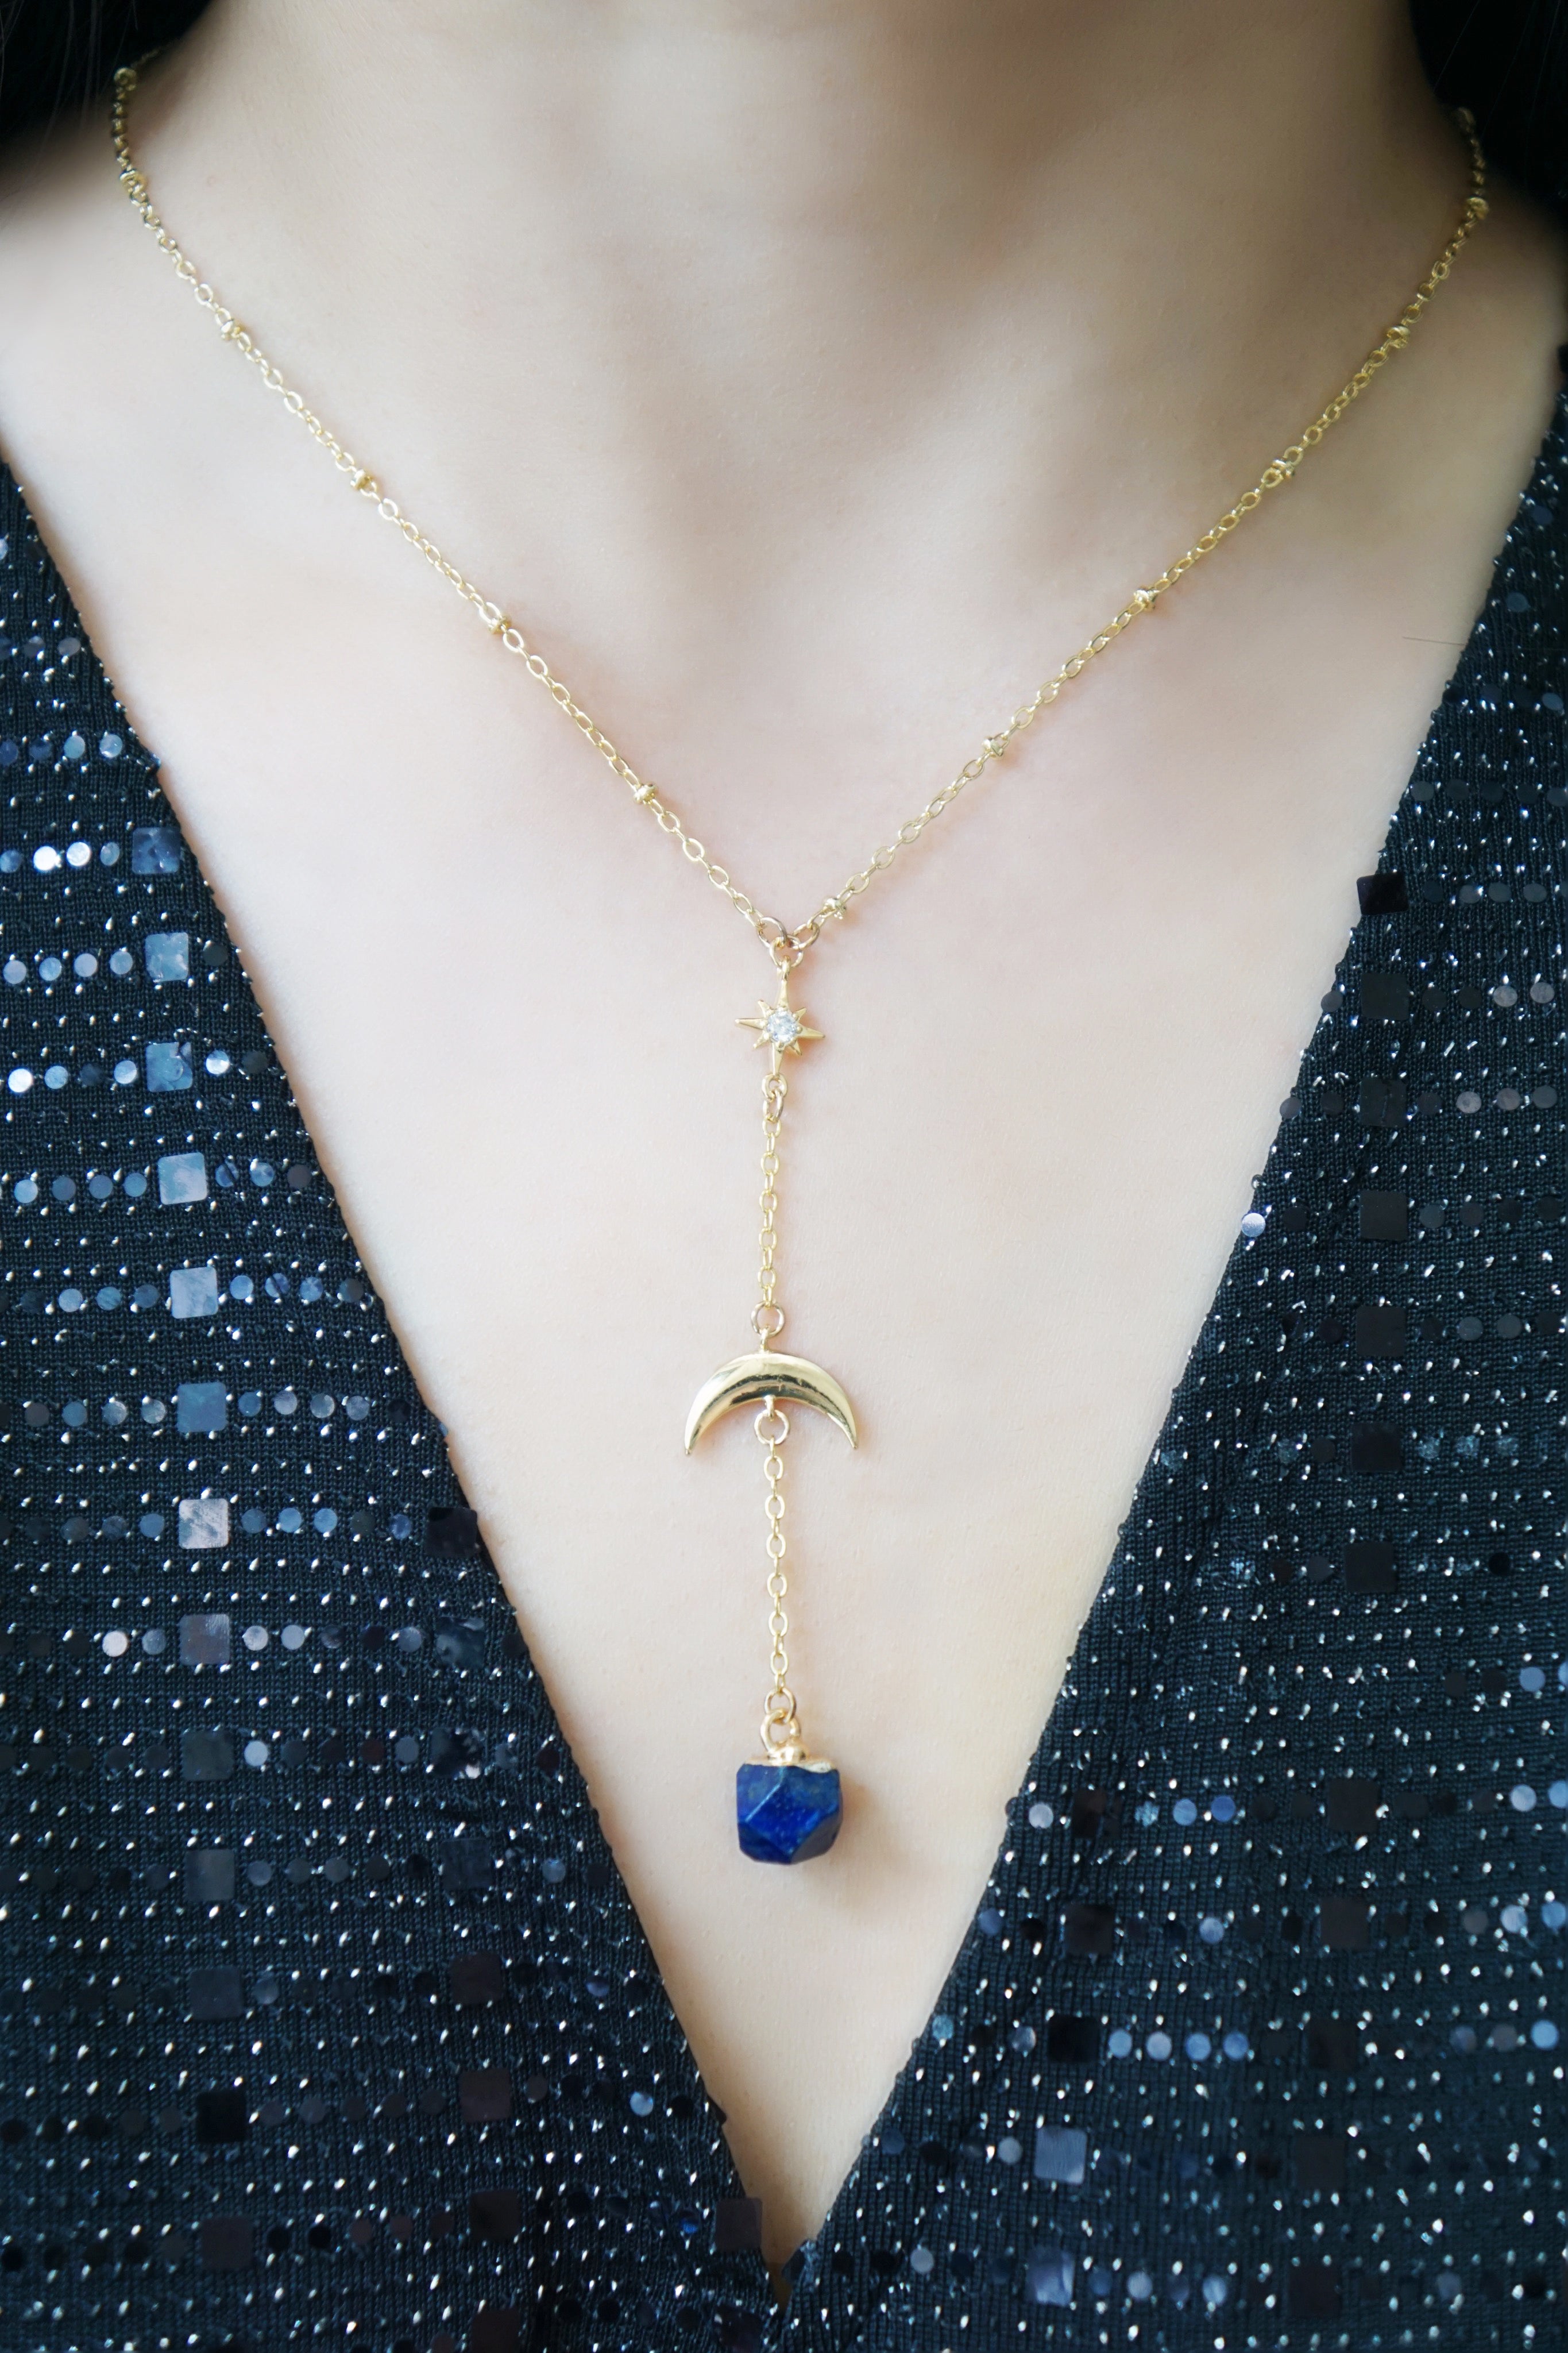 In The Sky With Diamonds Necklace - Lapis Lazuli